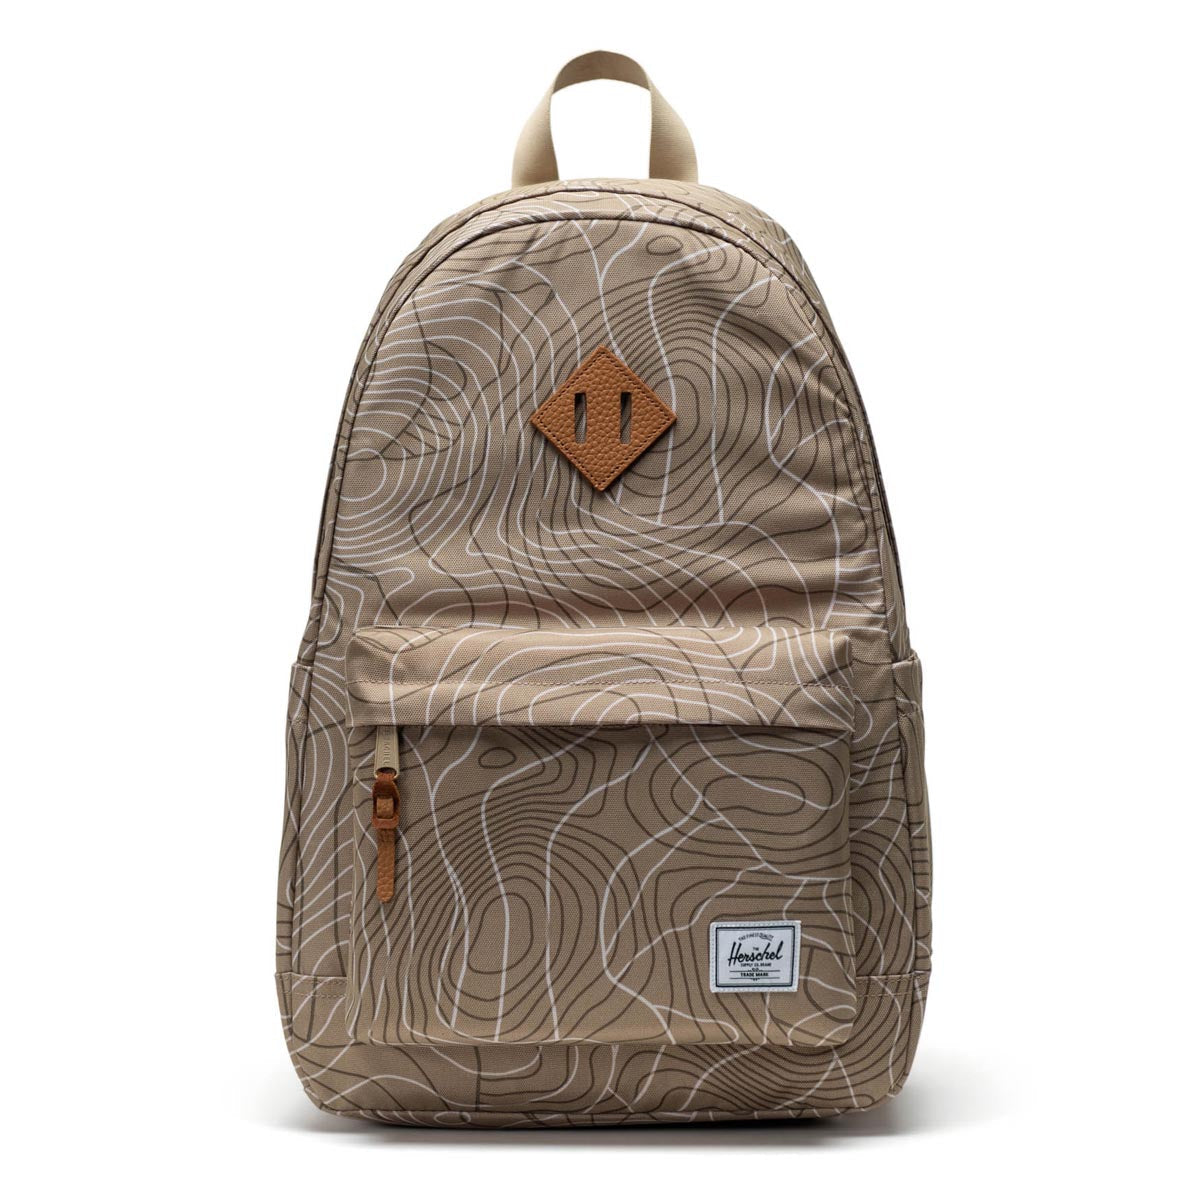 Herschel Supply Heritage Backpack - Twill Topography image 1